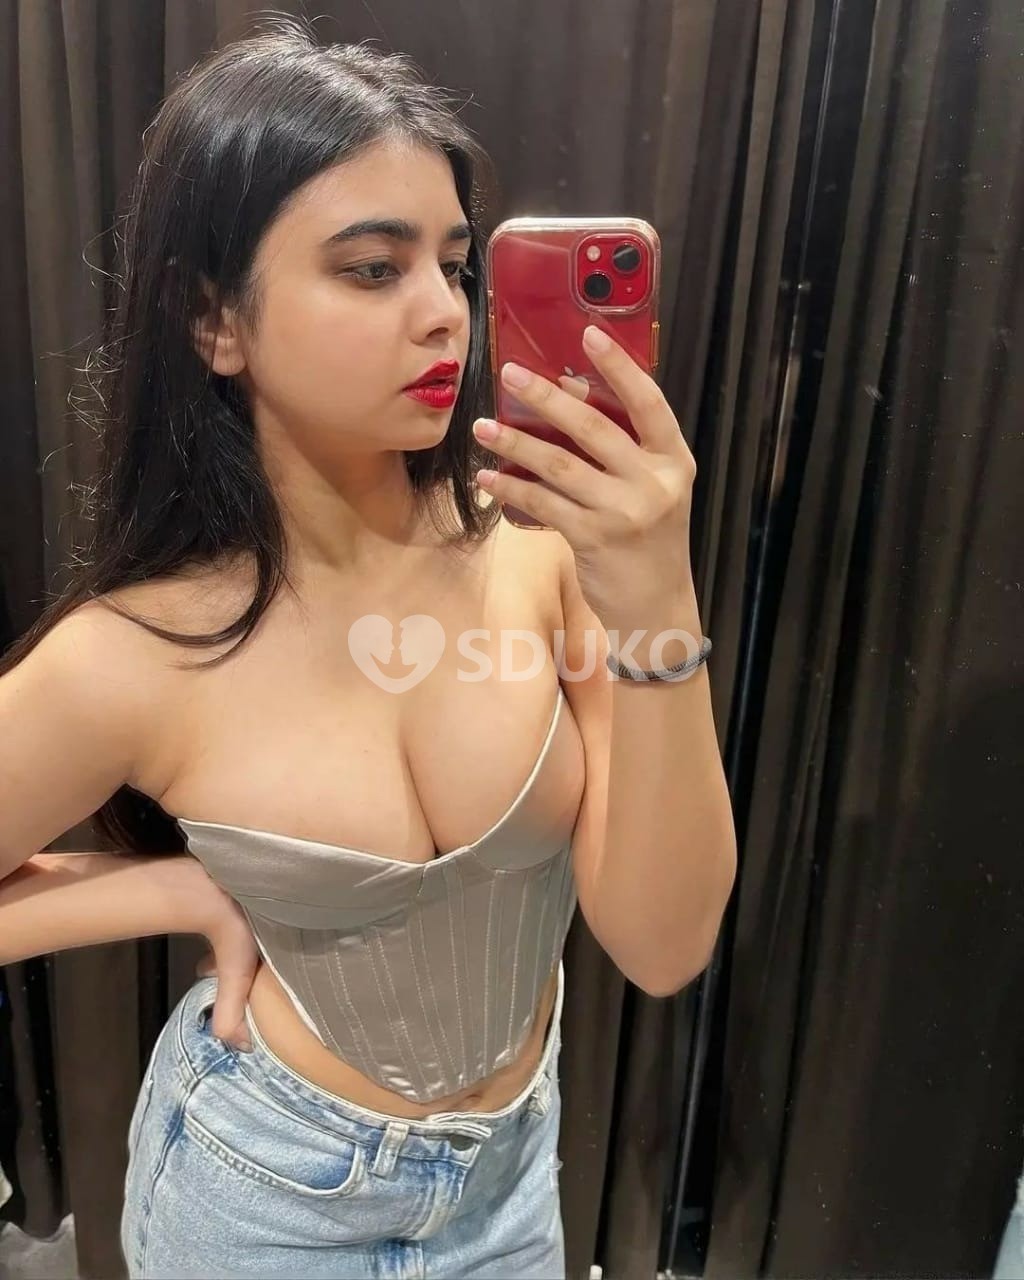 Indra nagar ❤️24x7 AFFORDABLE CHEAPEST RATE SAFE CALL GIRL SERVICE...